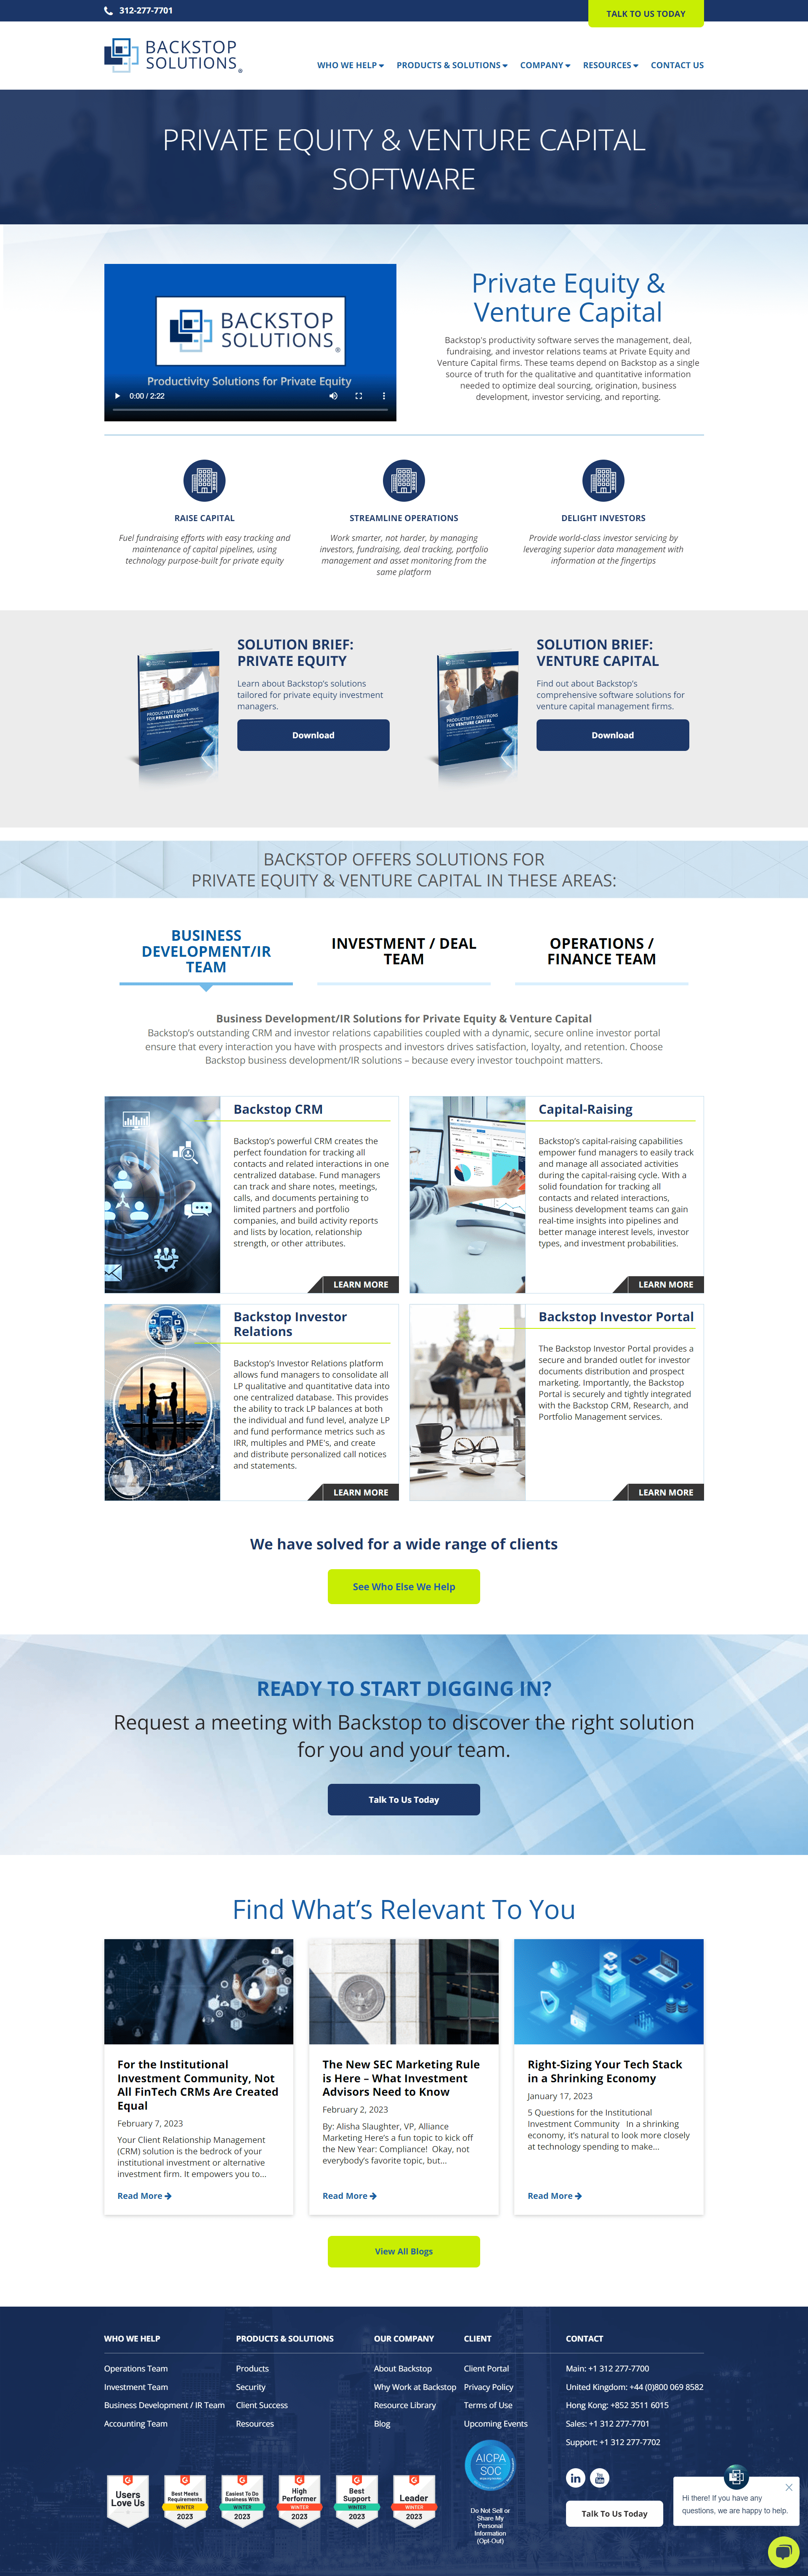 Backstop Solutions Service Page Design